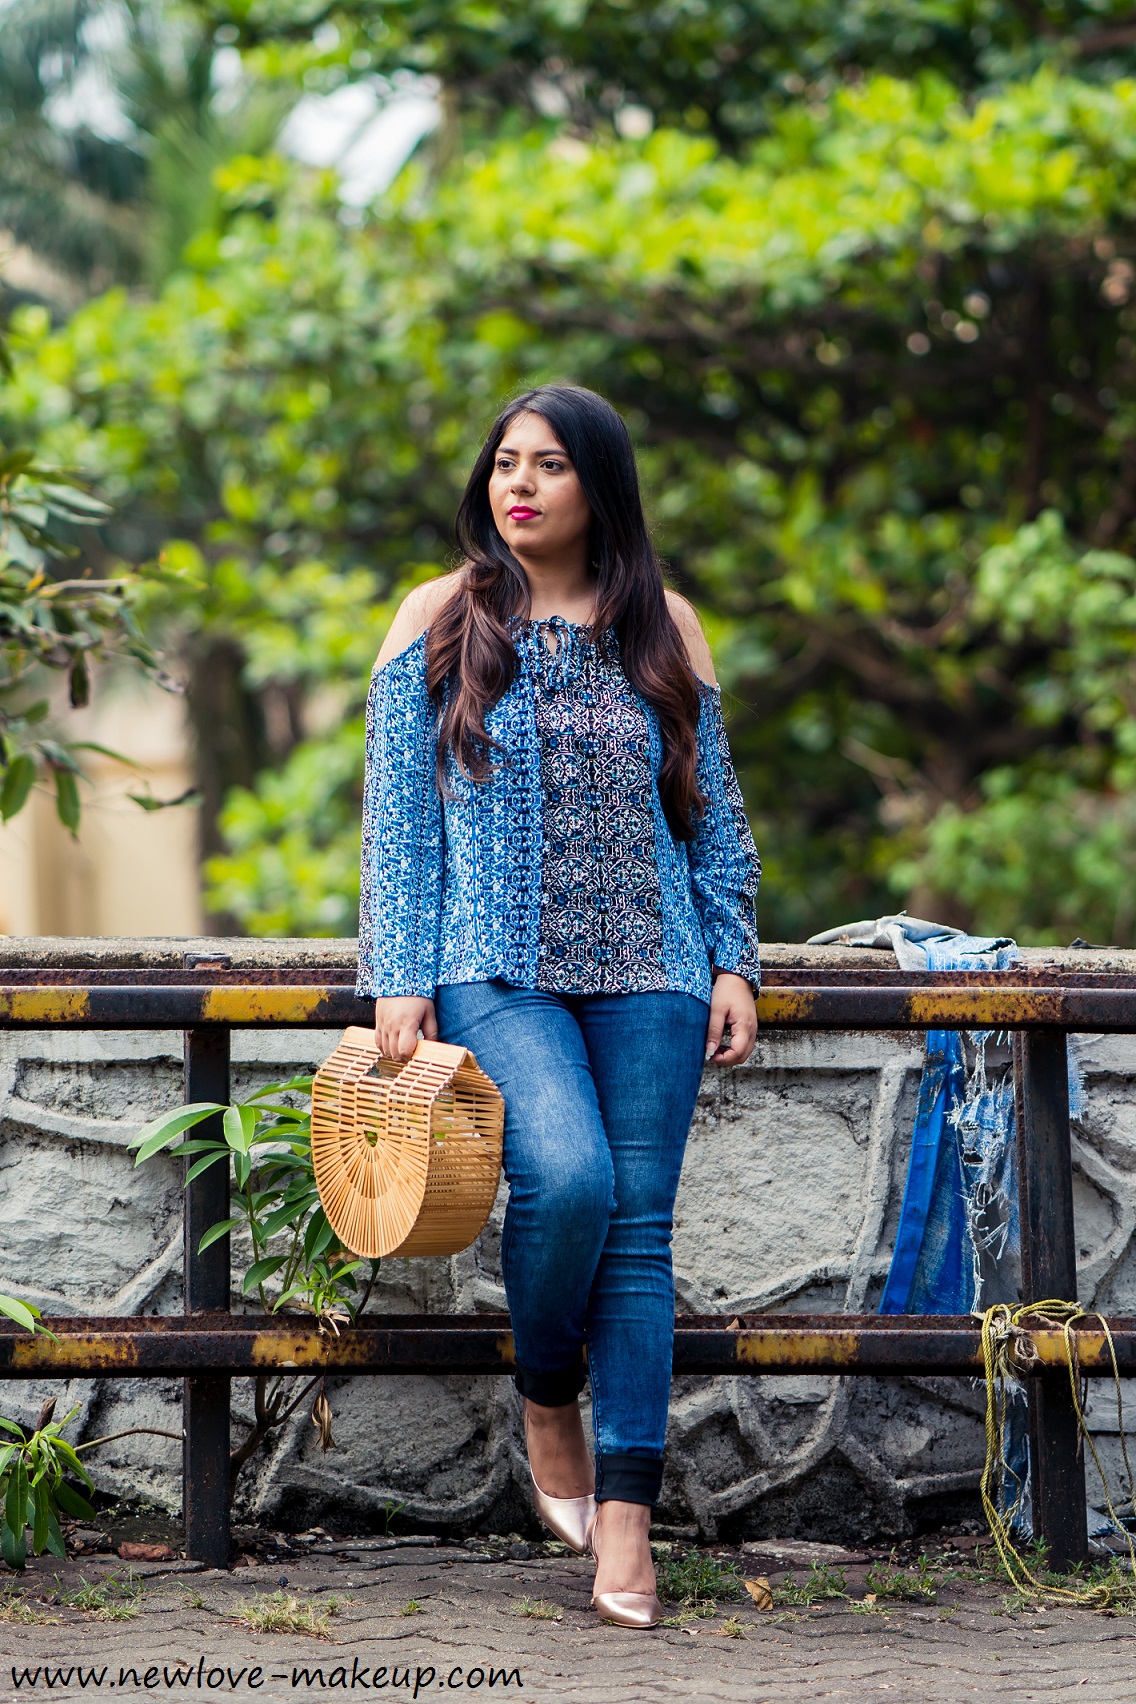 OOTD: Shades of Blue feat. Recap Jeans, Indian Fashion Blog